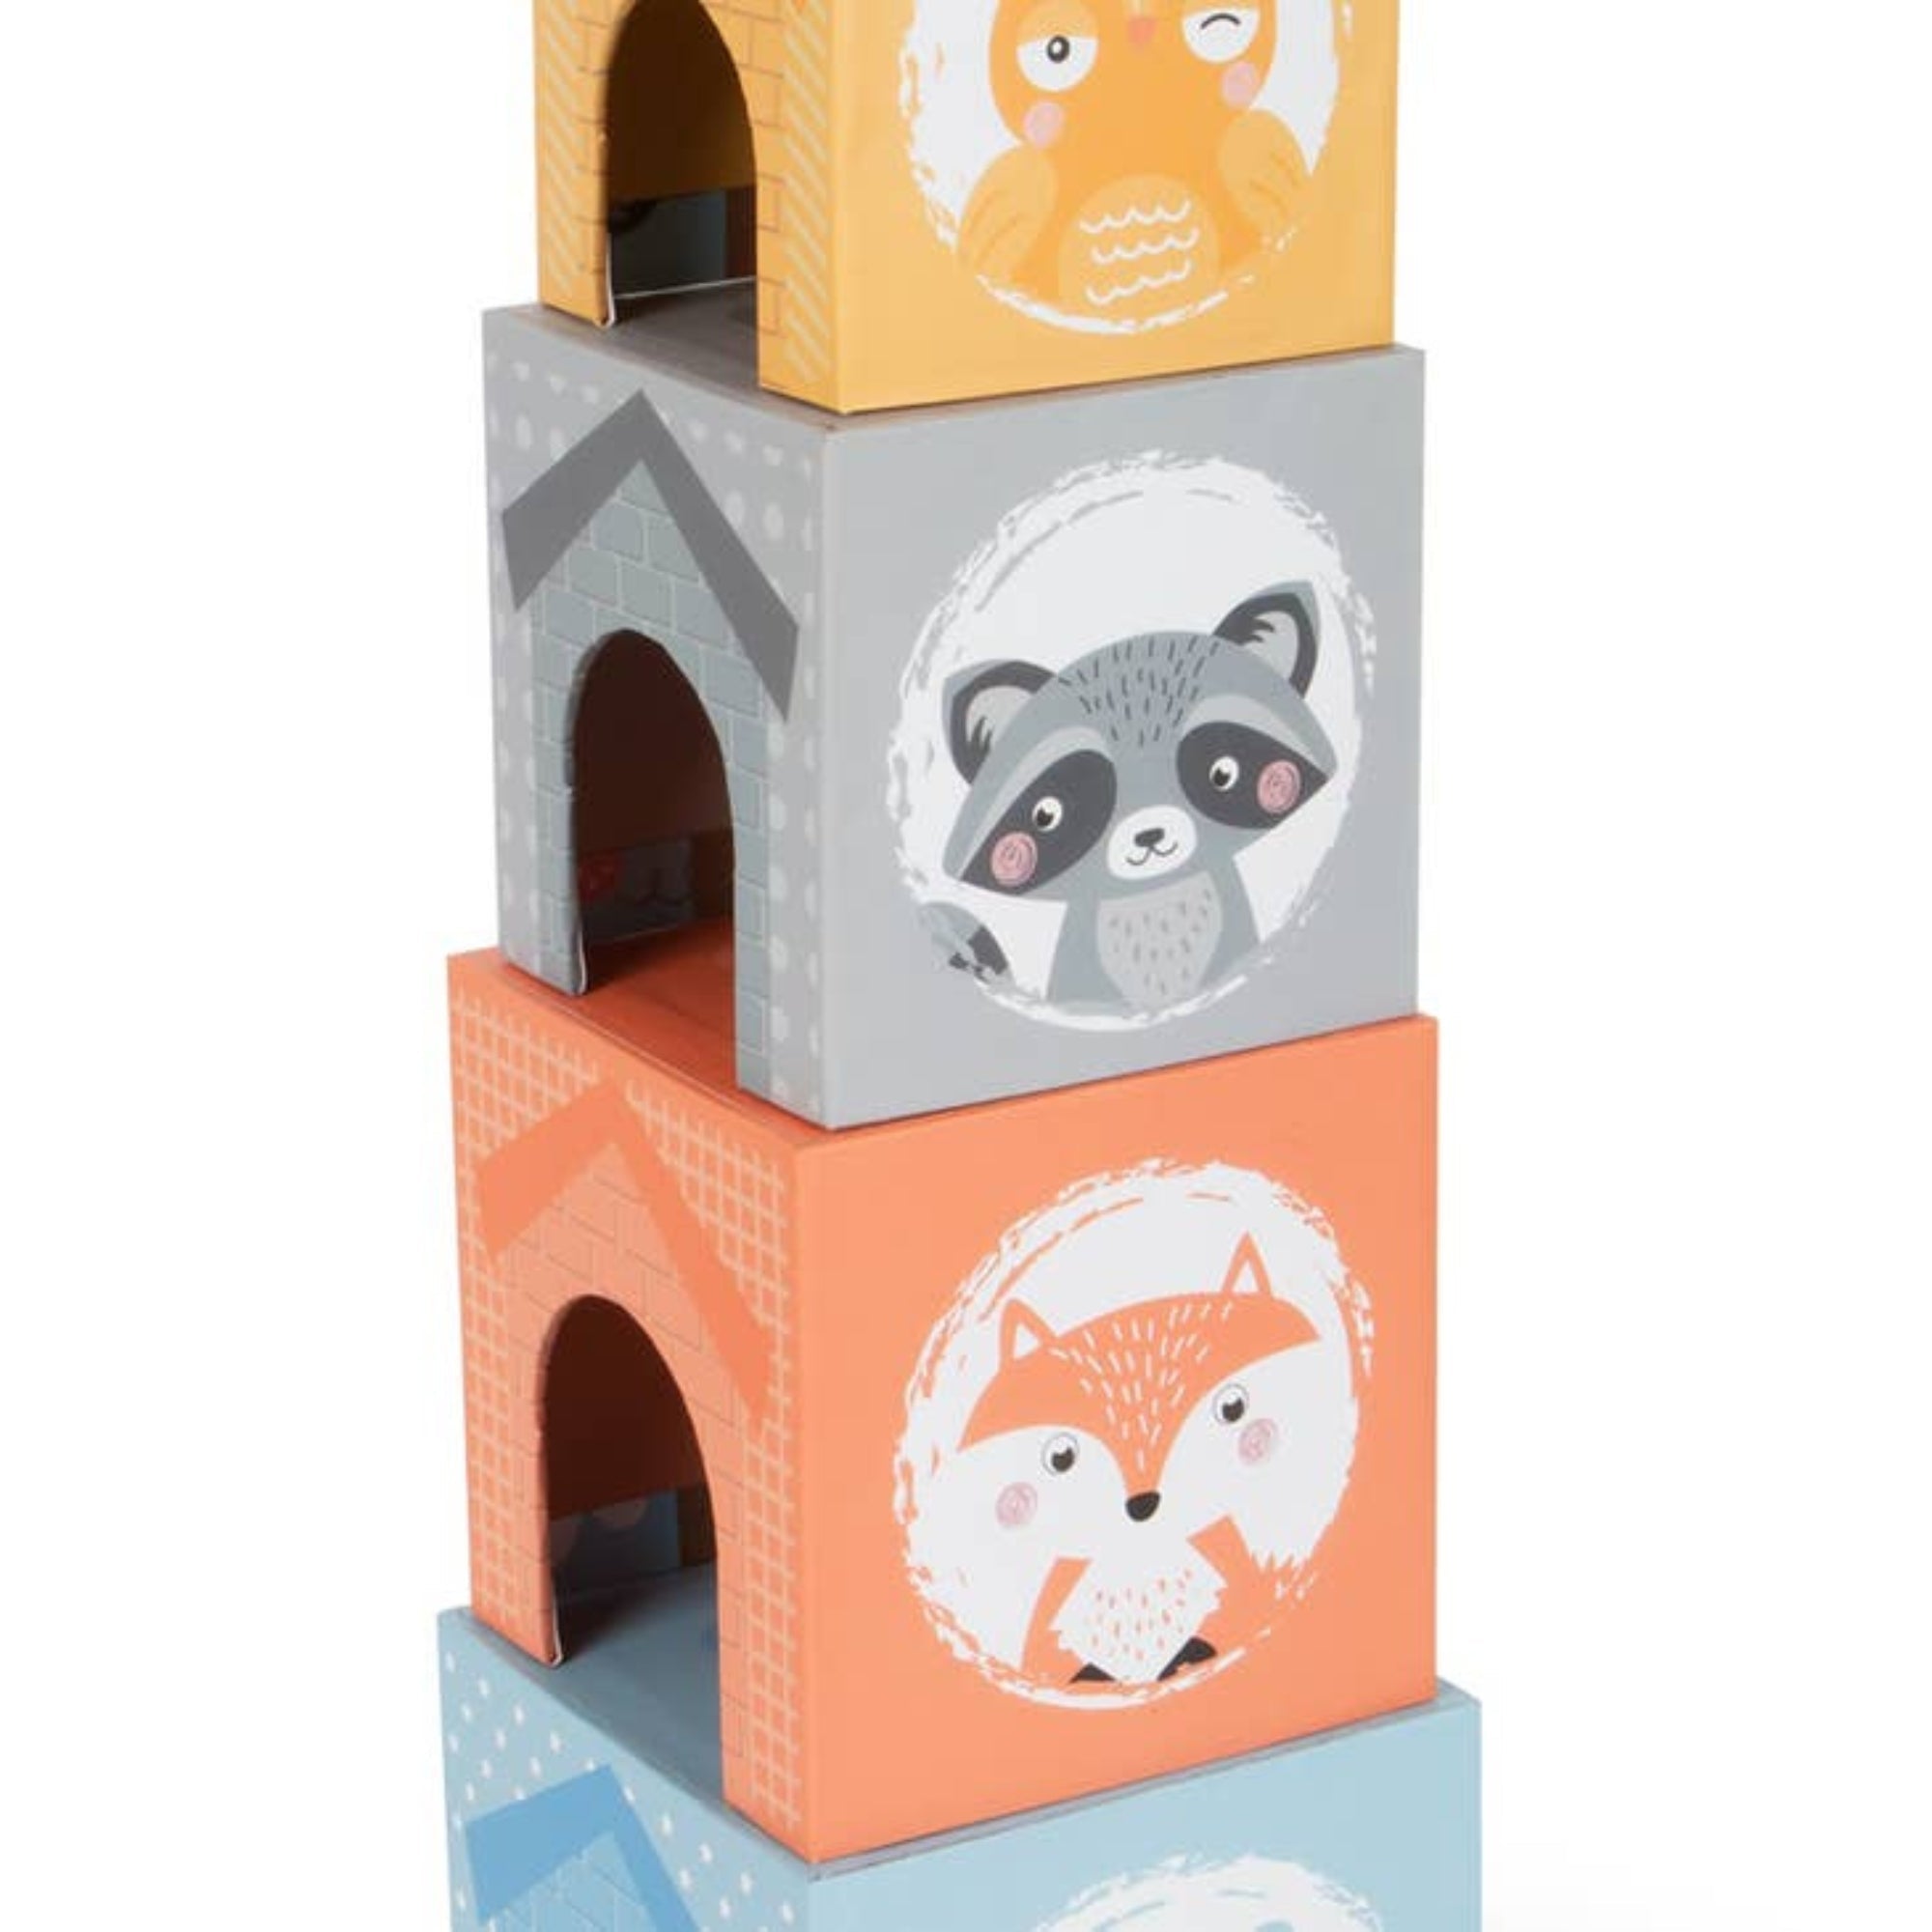 Stacking Tower Pastel, Introducing our Stacking Tower Pastel set, perfect for children looking to learn and have fun at the same time! The Stacking Tower Pastel set includes five pastel-coloured stacking cubes made of sturdy cardboard, along with matching wooden animal figures. Each cube has playful illustrations that guide children to stack them in the correct sequence. Four of the cubes also have door and window openings, providing extra fun for little ones to hide their animal figures.To make learning ev